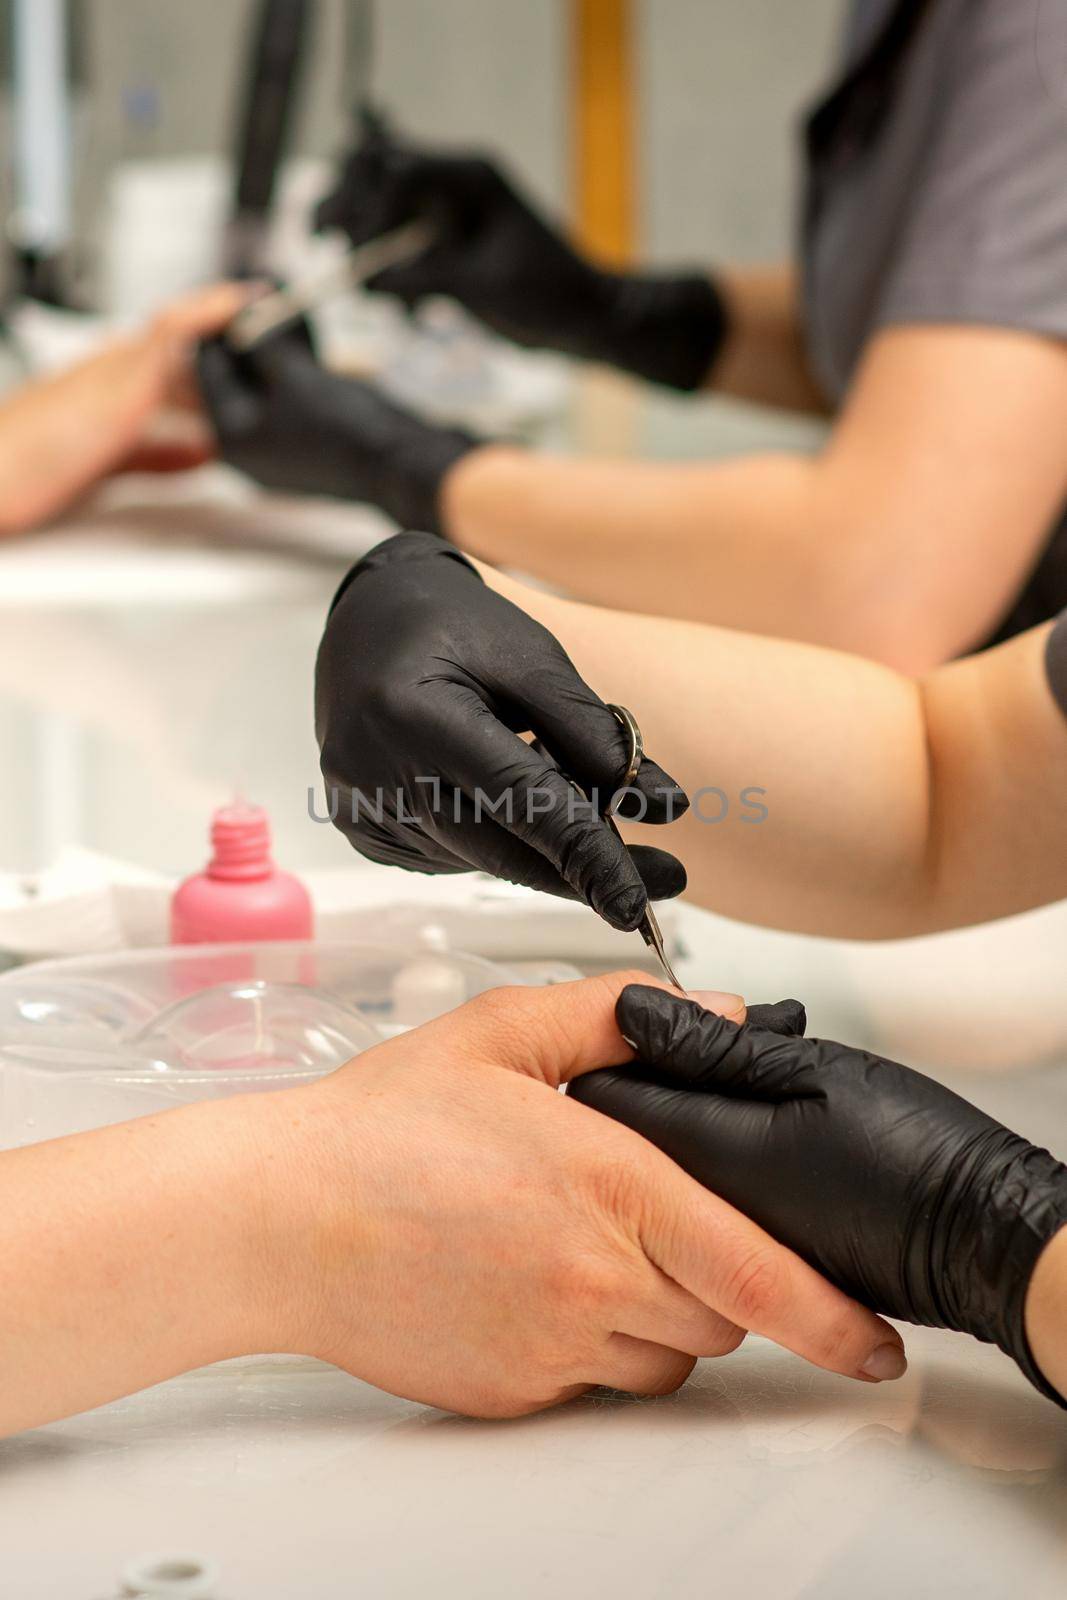 Manicure master removes cuticles from female nails with scissors wearing protective gloves in manicure salon. by okskukuruza